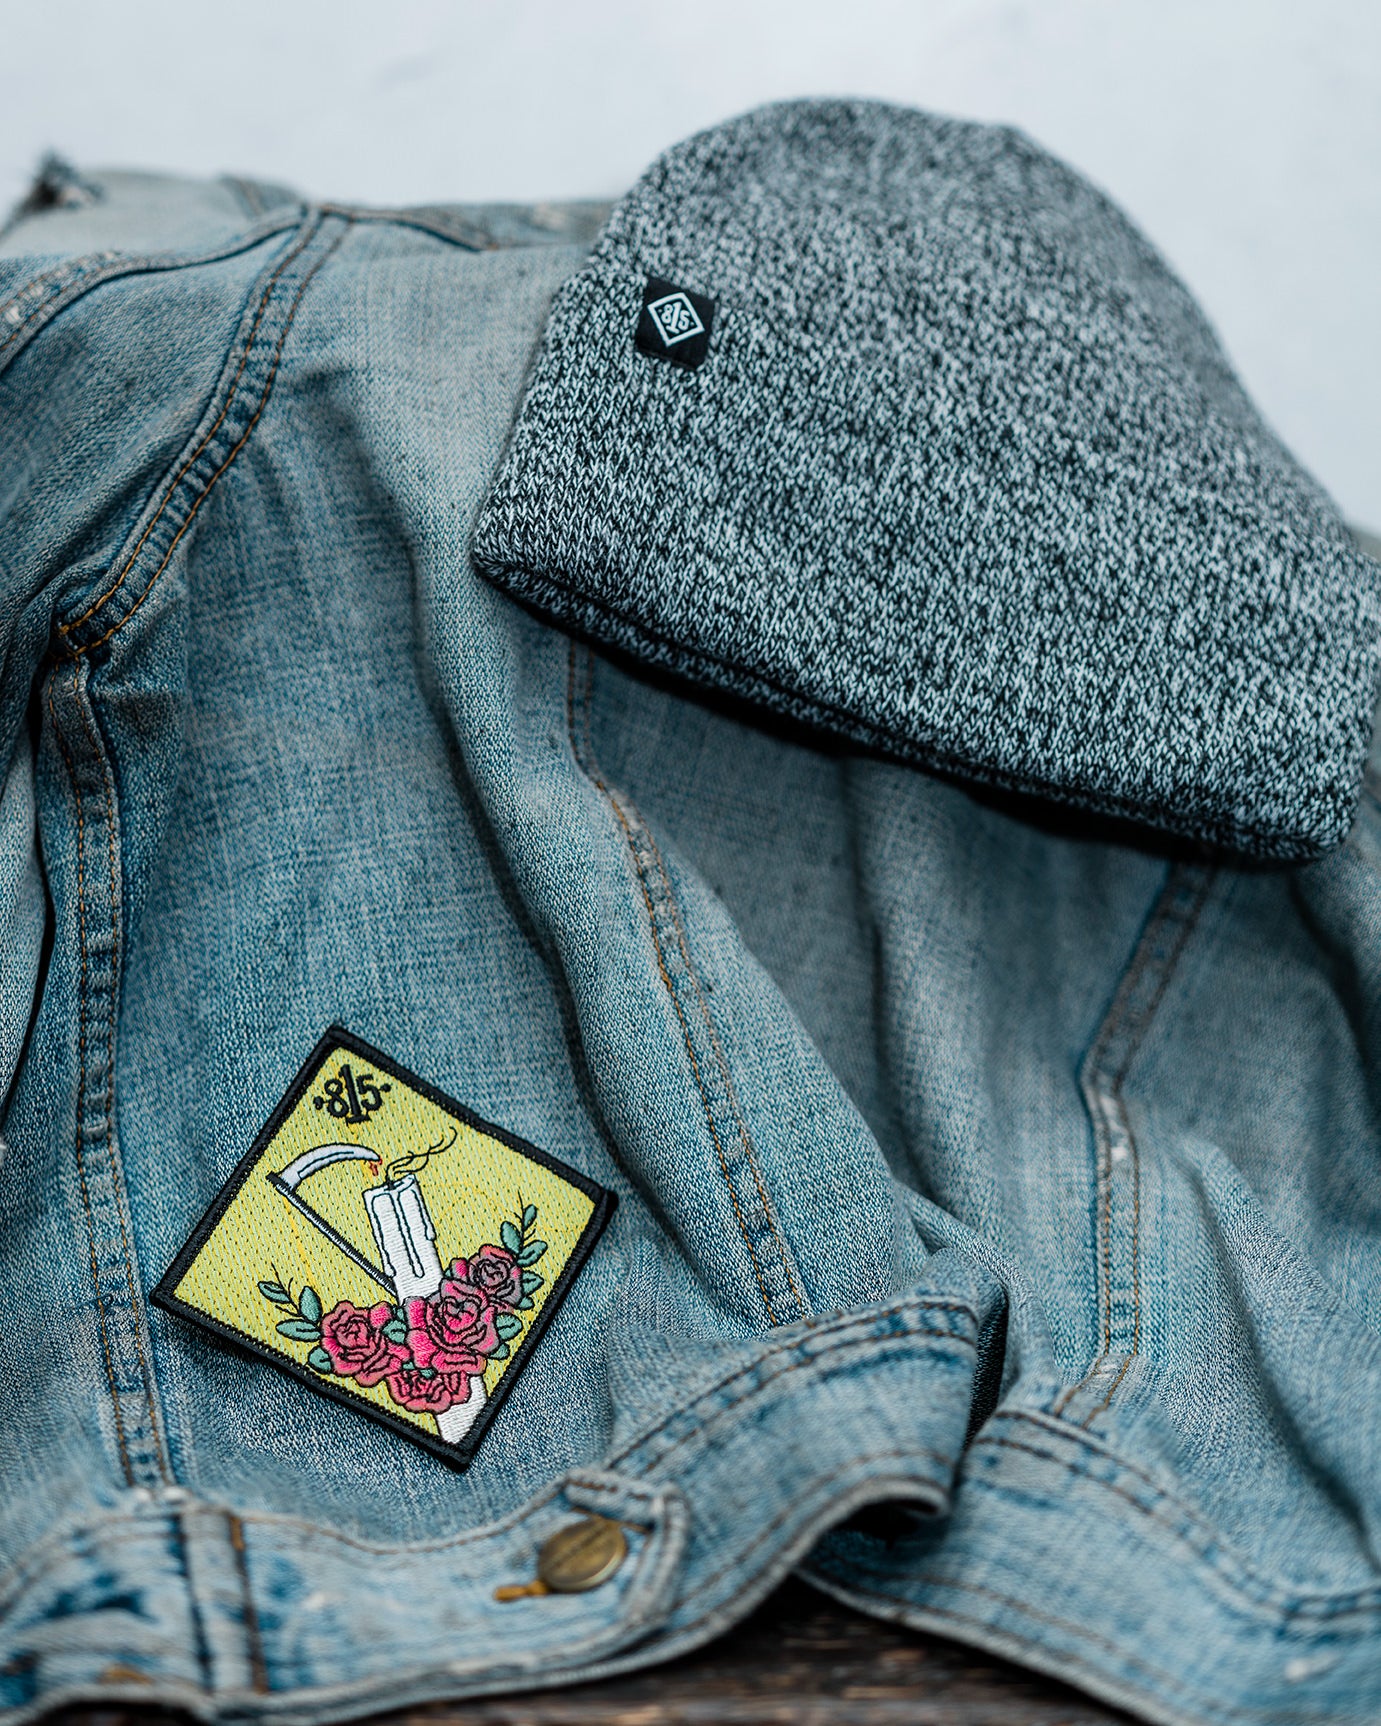 Diamond Candle Slayer Patch - Sickle - Candle - Roses - Denim Jacket - Beanie - Outfit